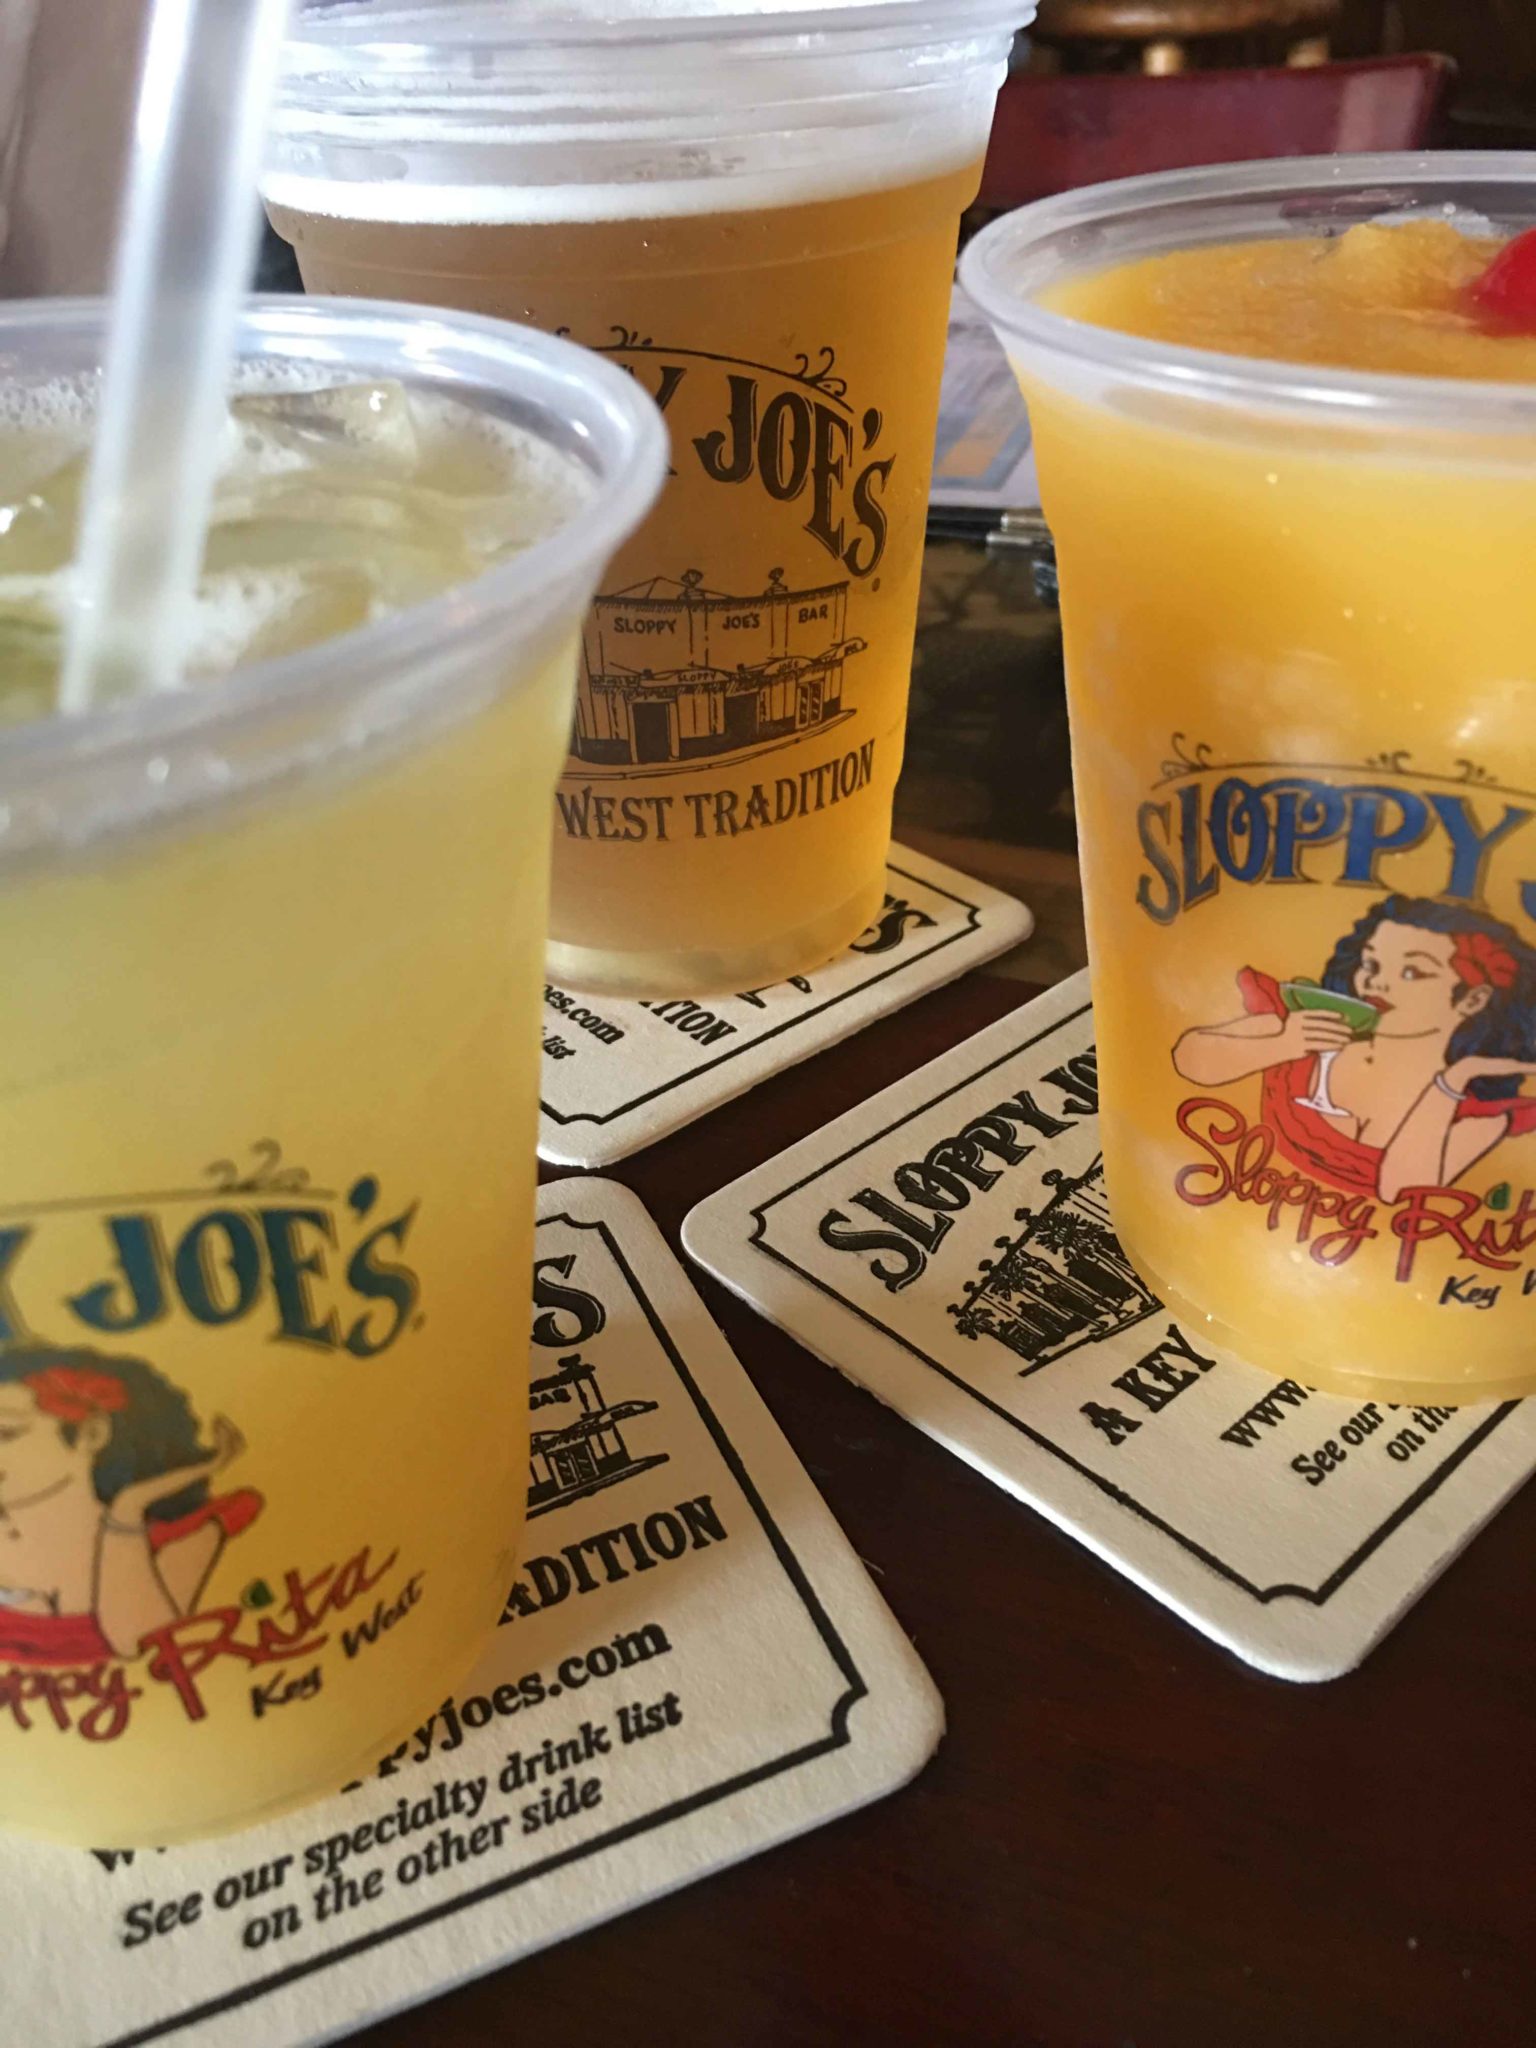 Sloppy Joe’s a Bar, a Drink and a Place at the End of the World